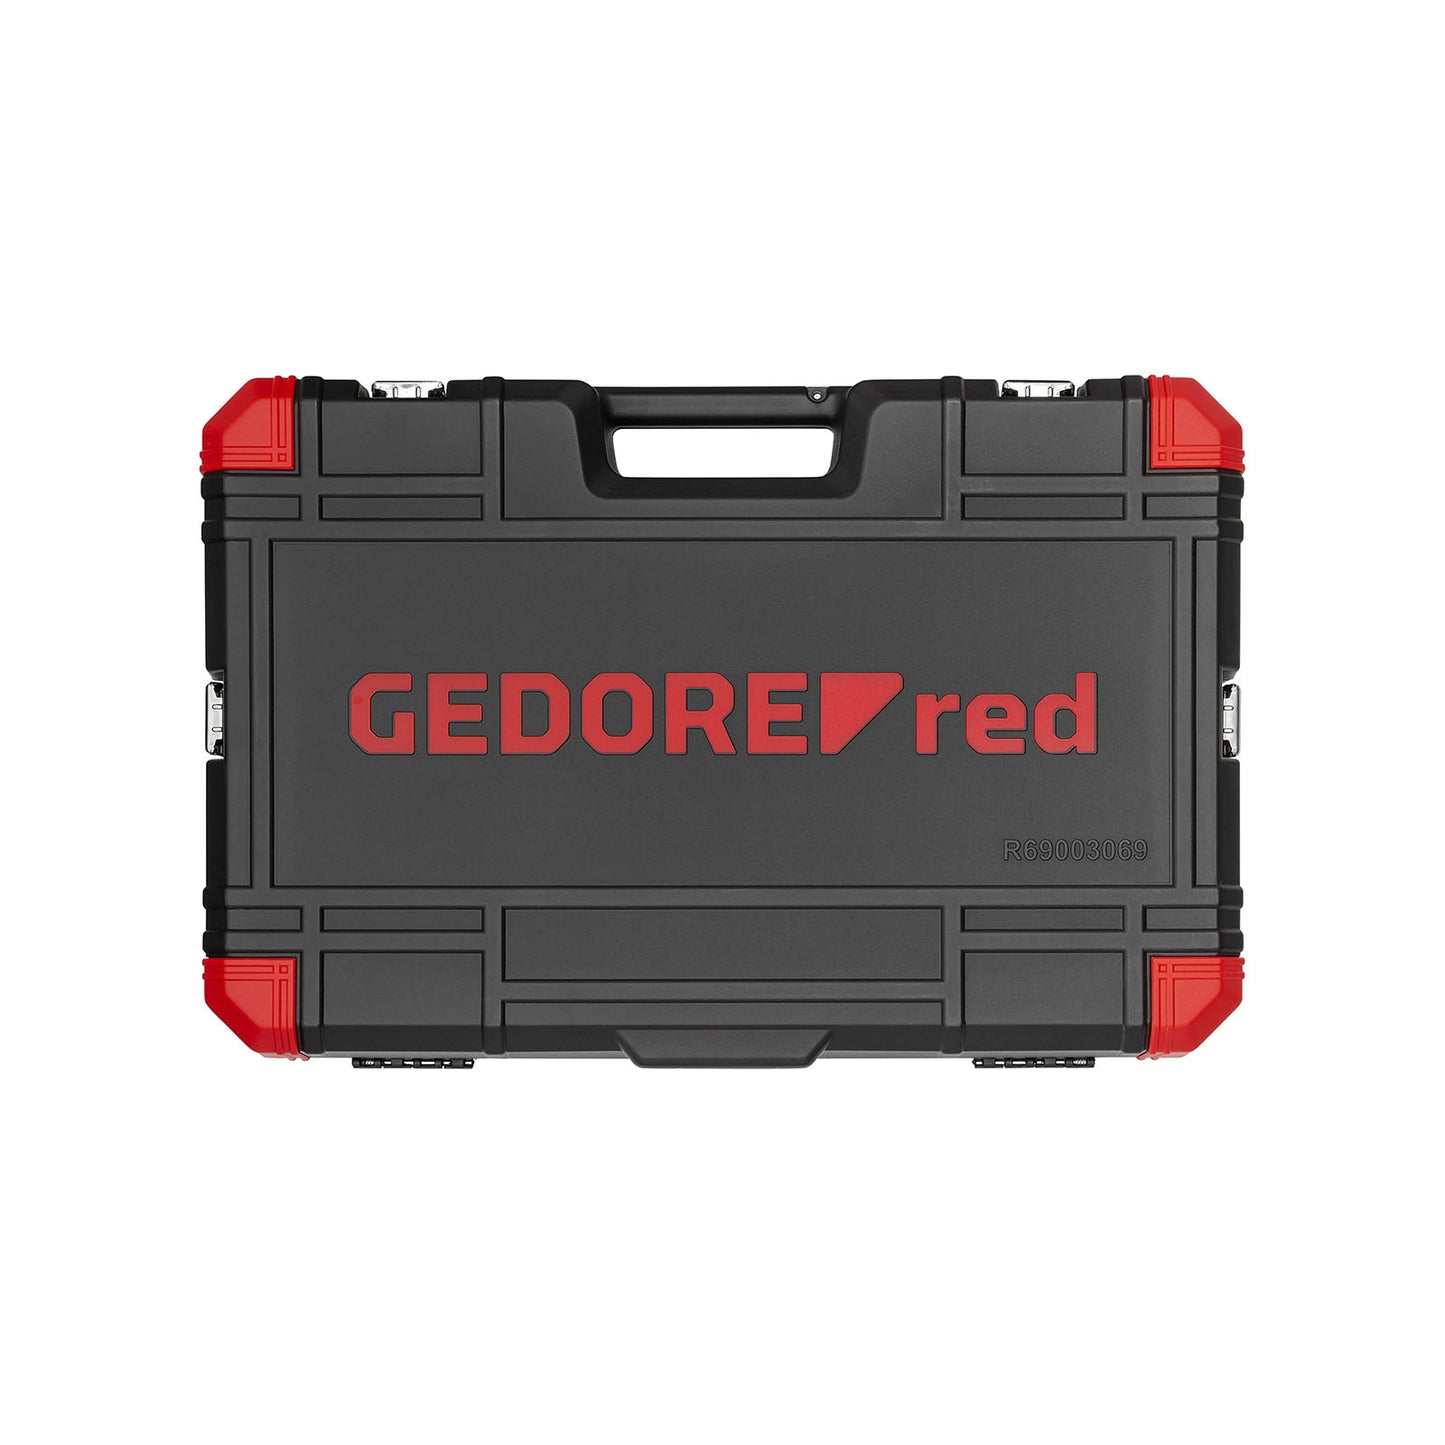 GEDORE red R69003069 - Socket wrench set 1/2" 8-24mm (3300191)